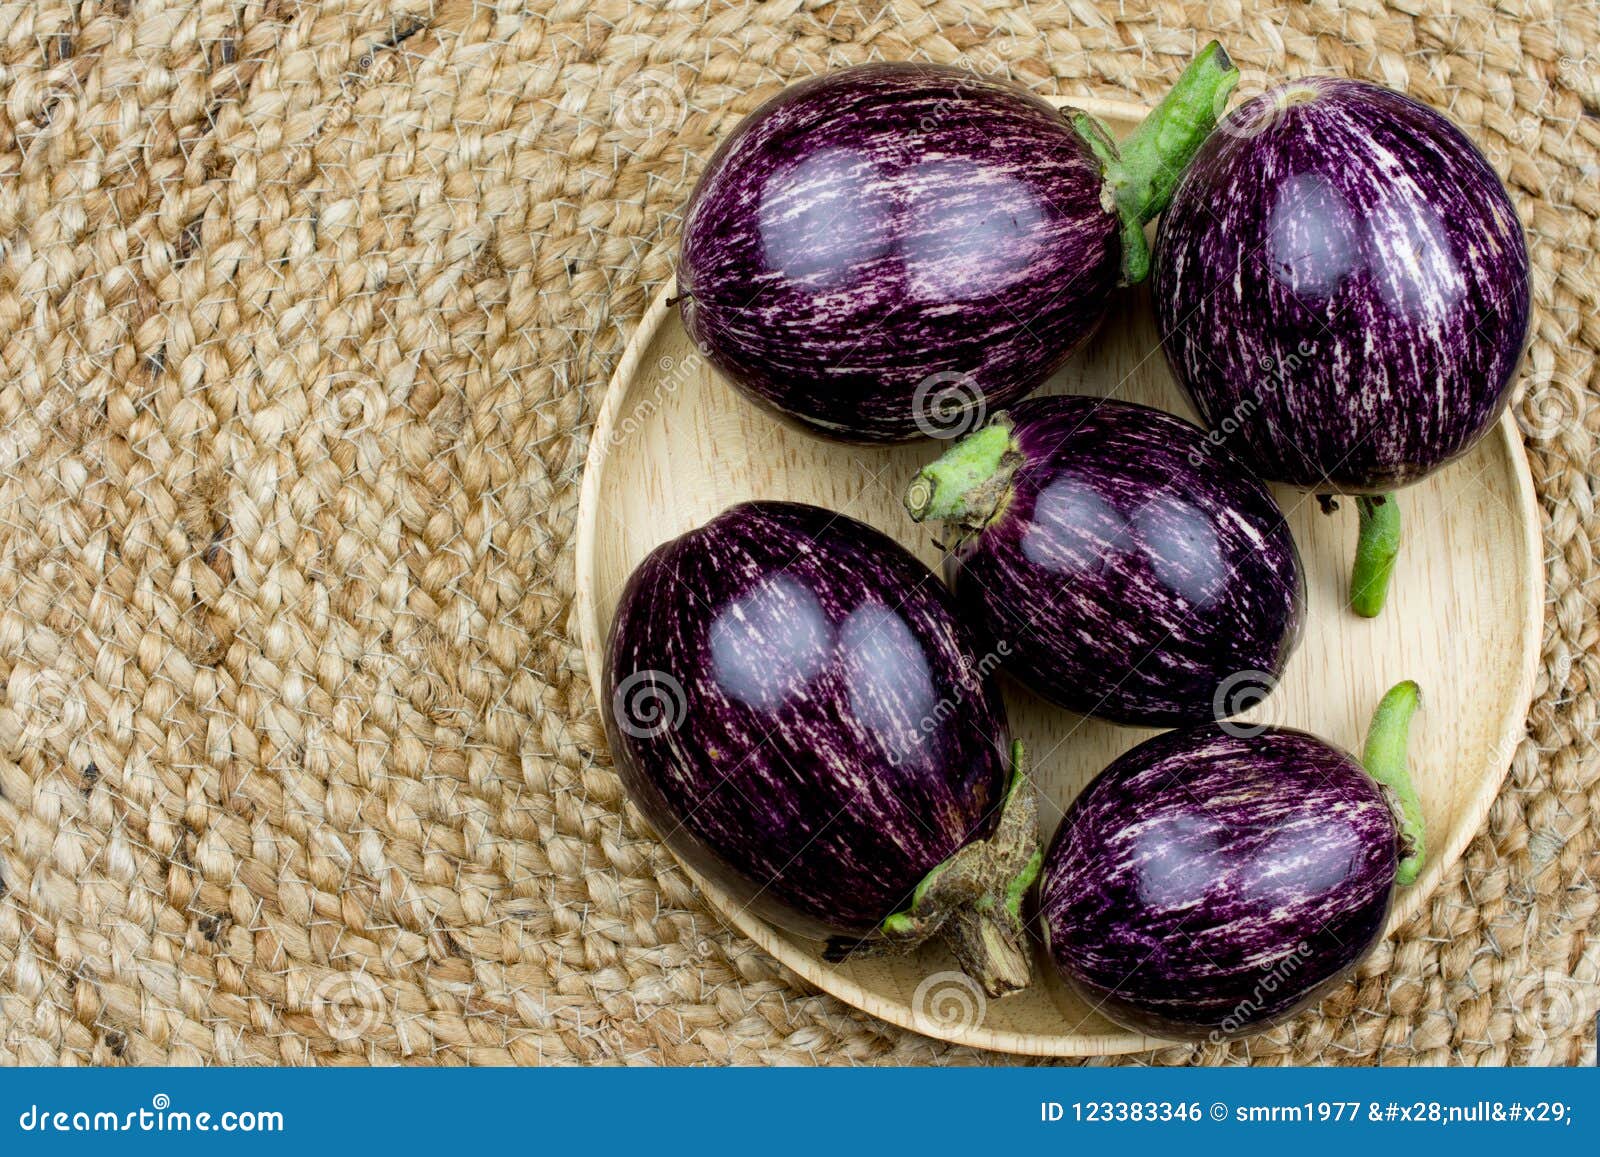 purple eggplant on wooden plate on black background and yute ta